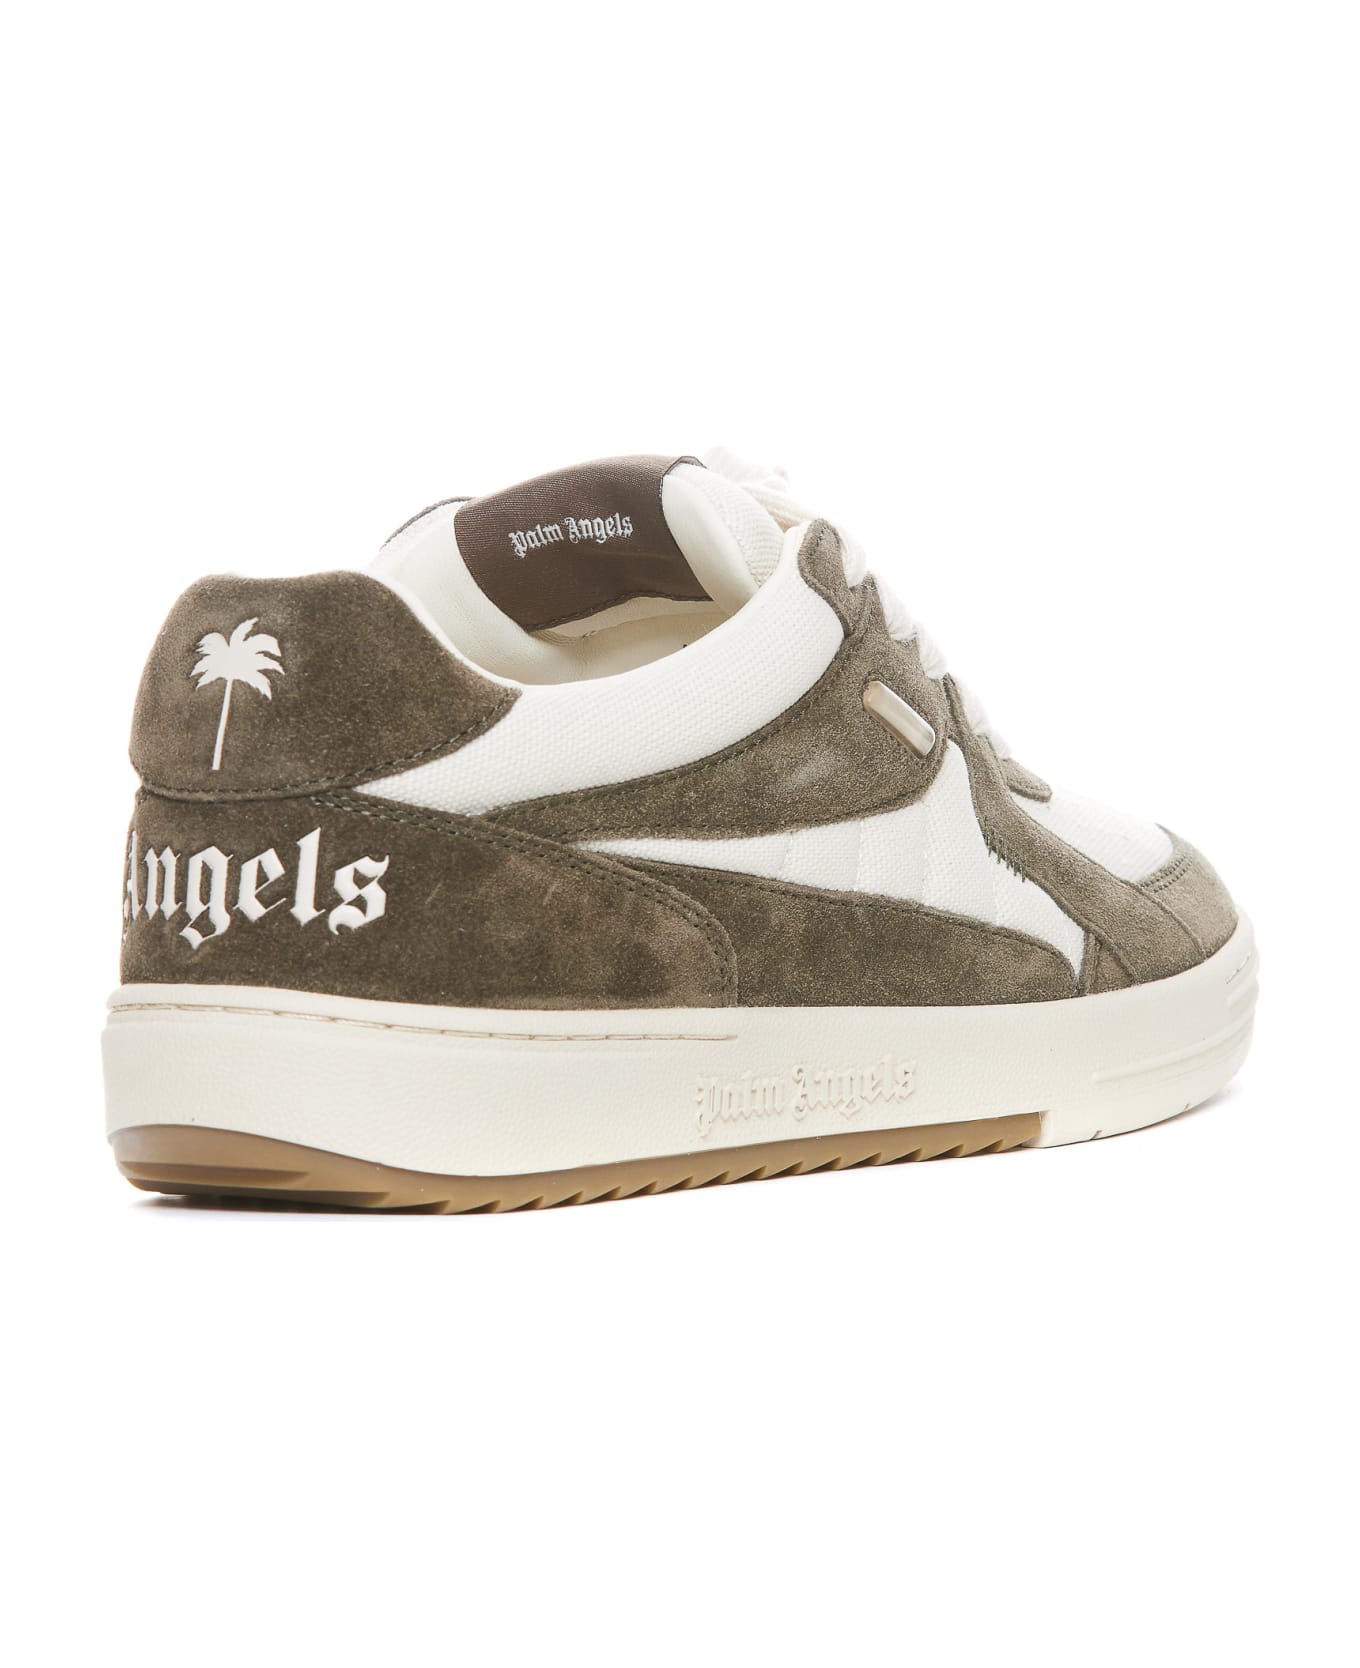 Palm Angels Logo Embroidered University Sneakers - White Dark